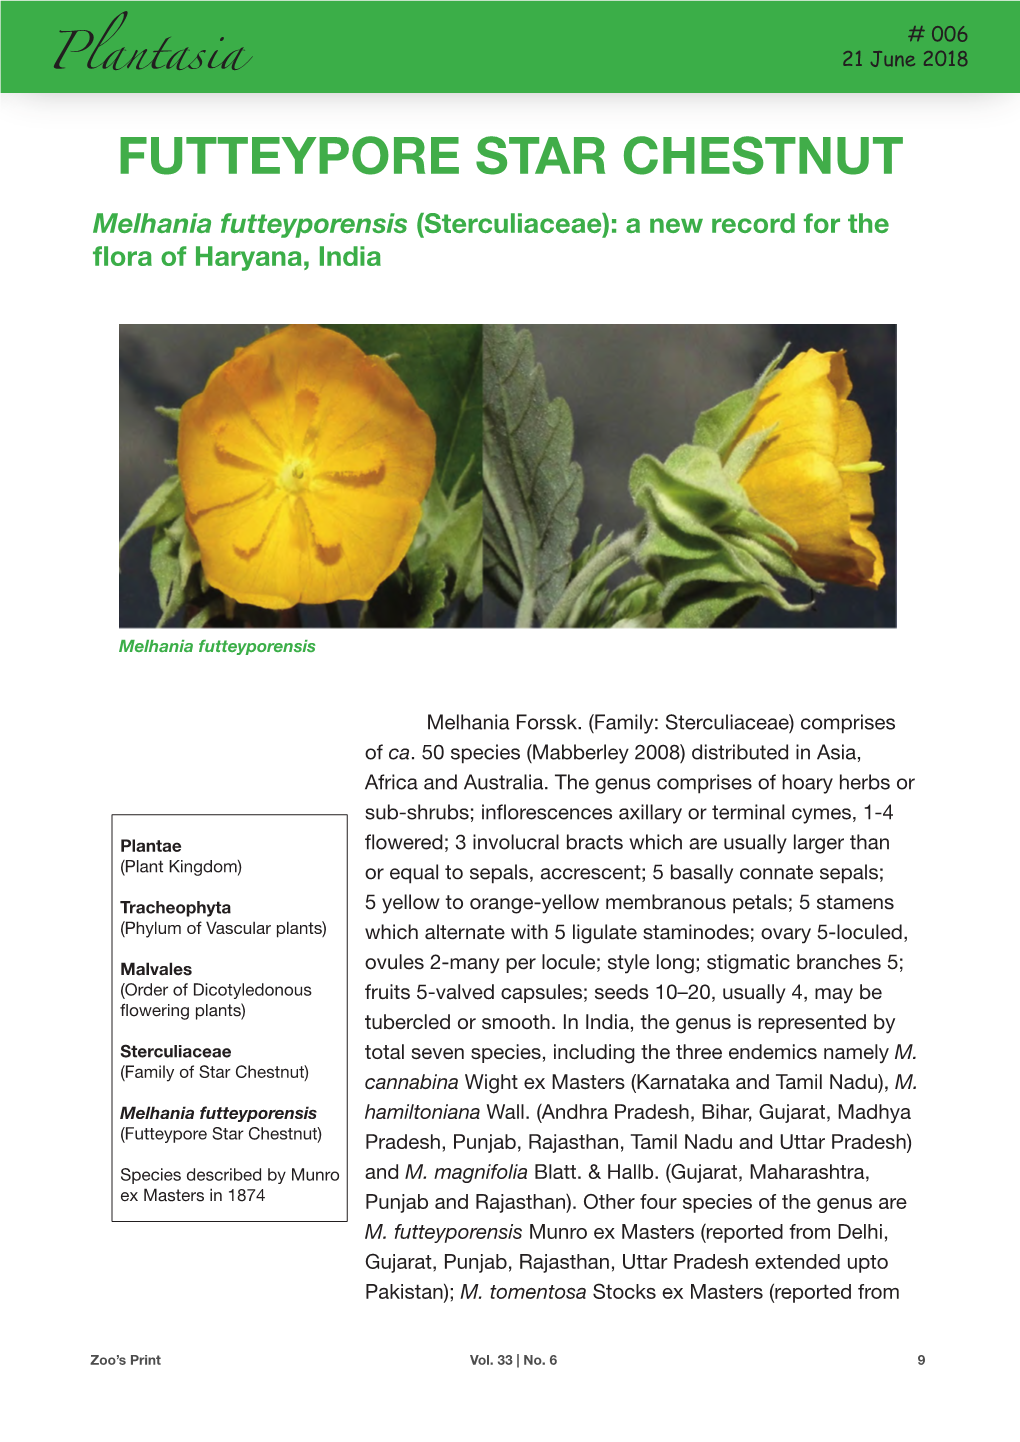 Melhania Futteyporensis (Sterculiaceae): a New Record for the Flora of Haryana, India